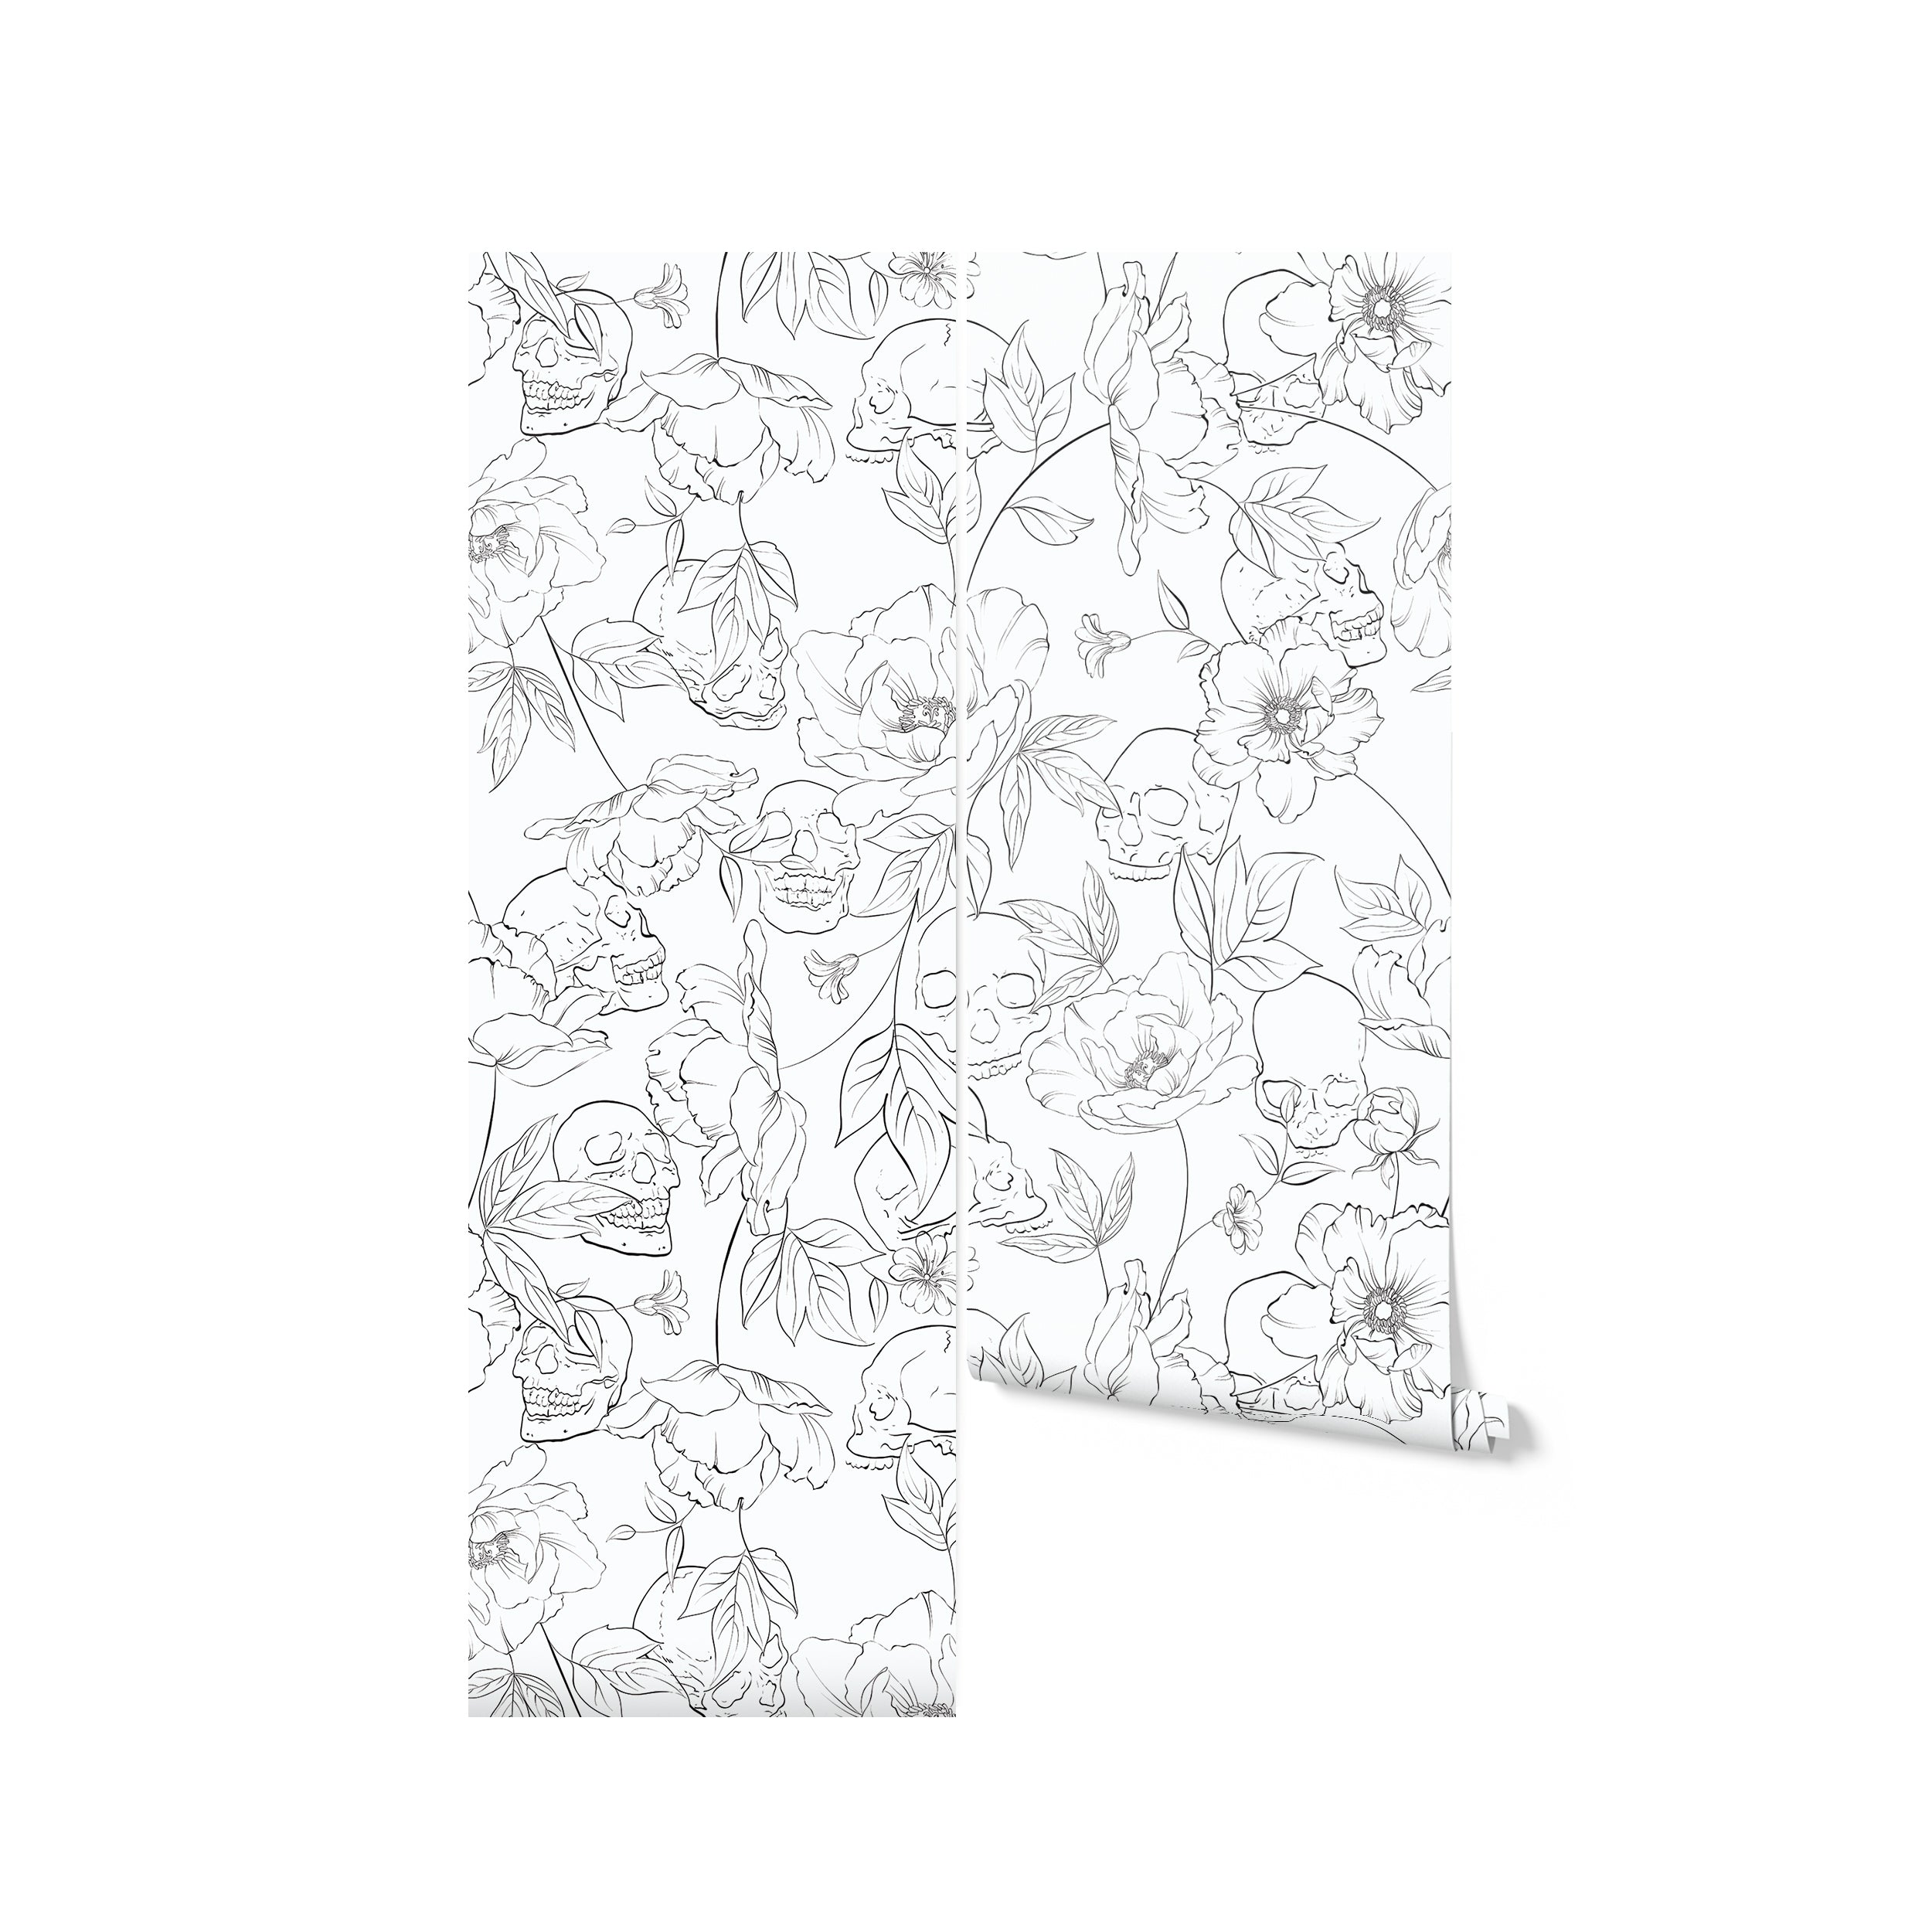 Close-up of the Dainty Skull Floral Wallpaper showing detailed line drawings of flowers and skulls, providing a unique and artistic decoration for a bold interior design statement